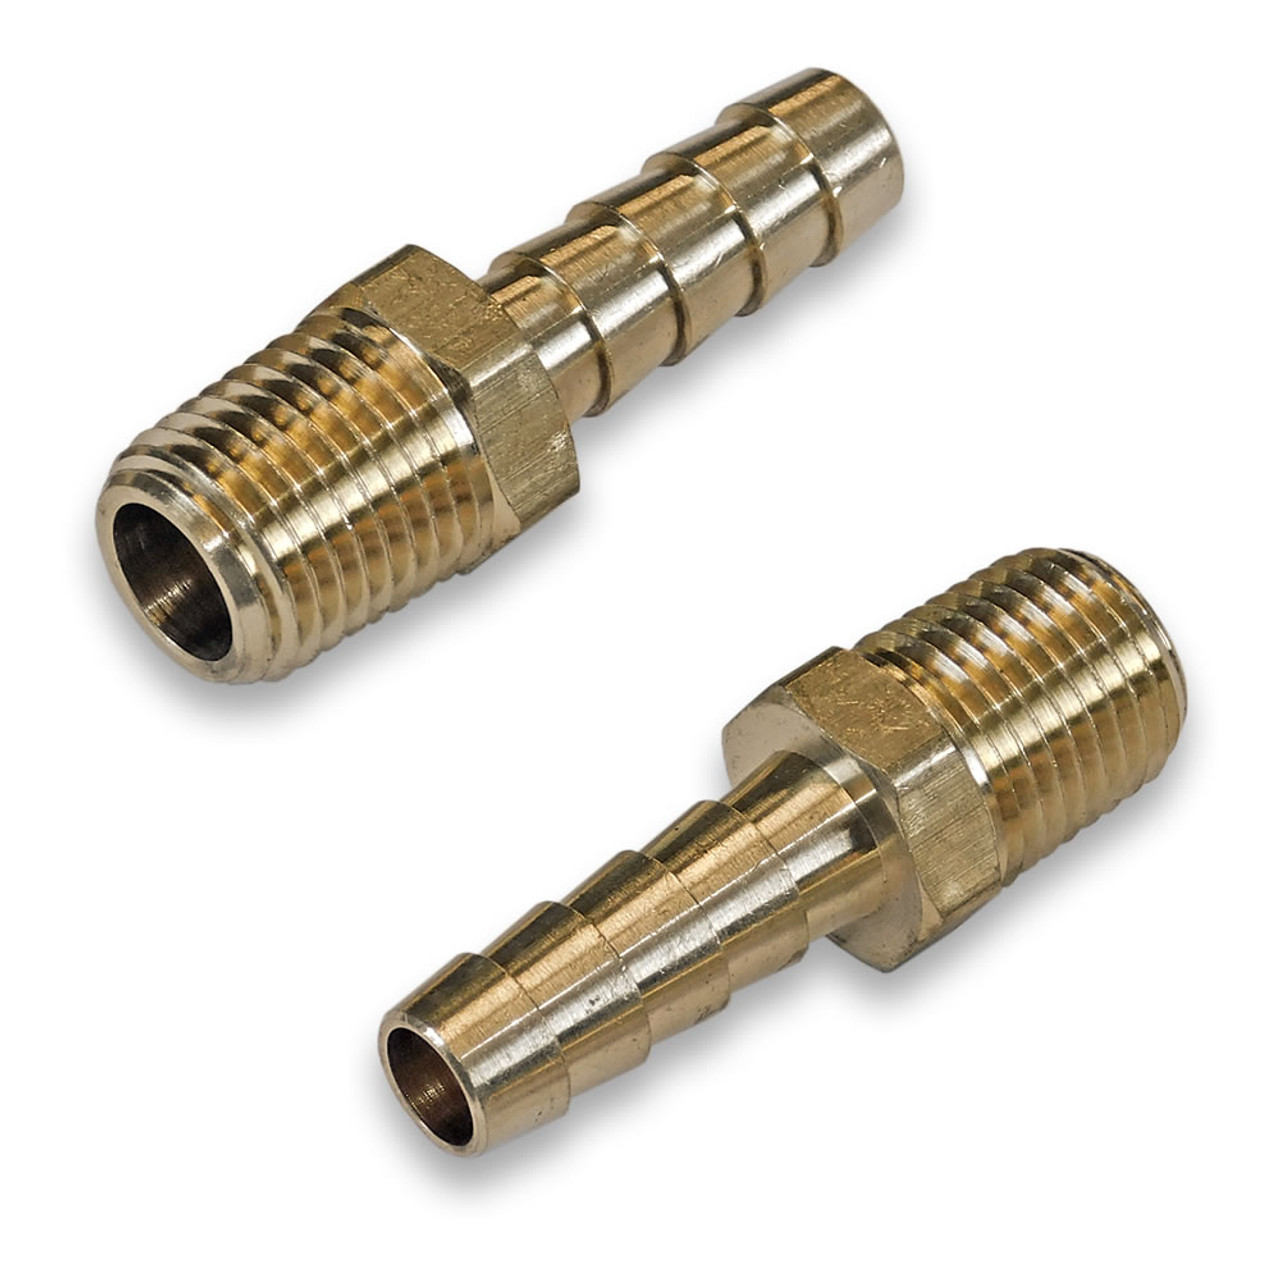 1/8 NPT to 5/16 (8mm) Hose Barb Fitting, Brass - Straight